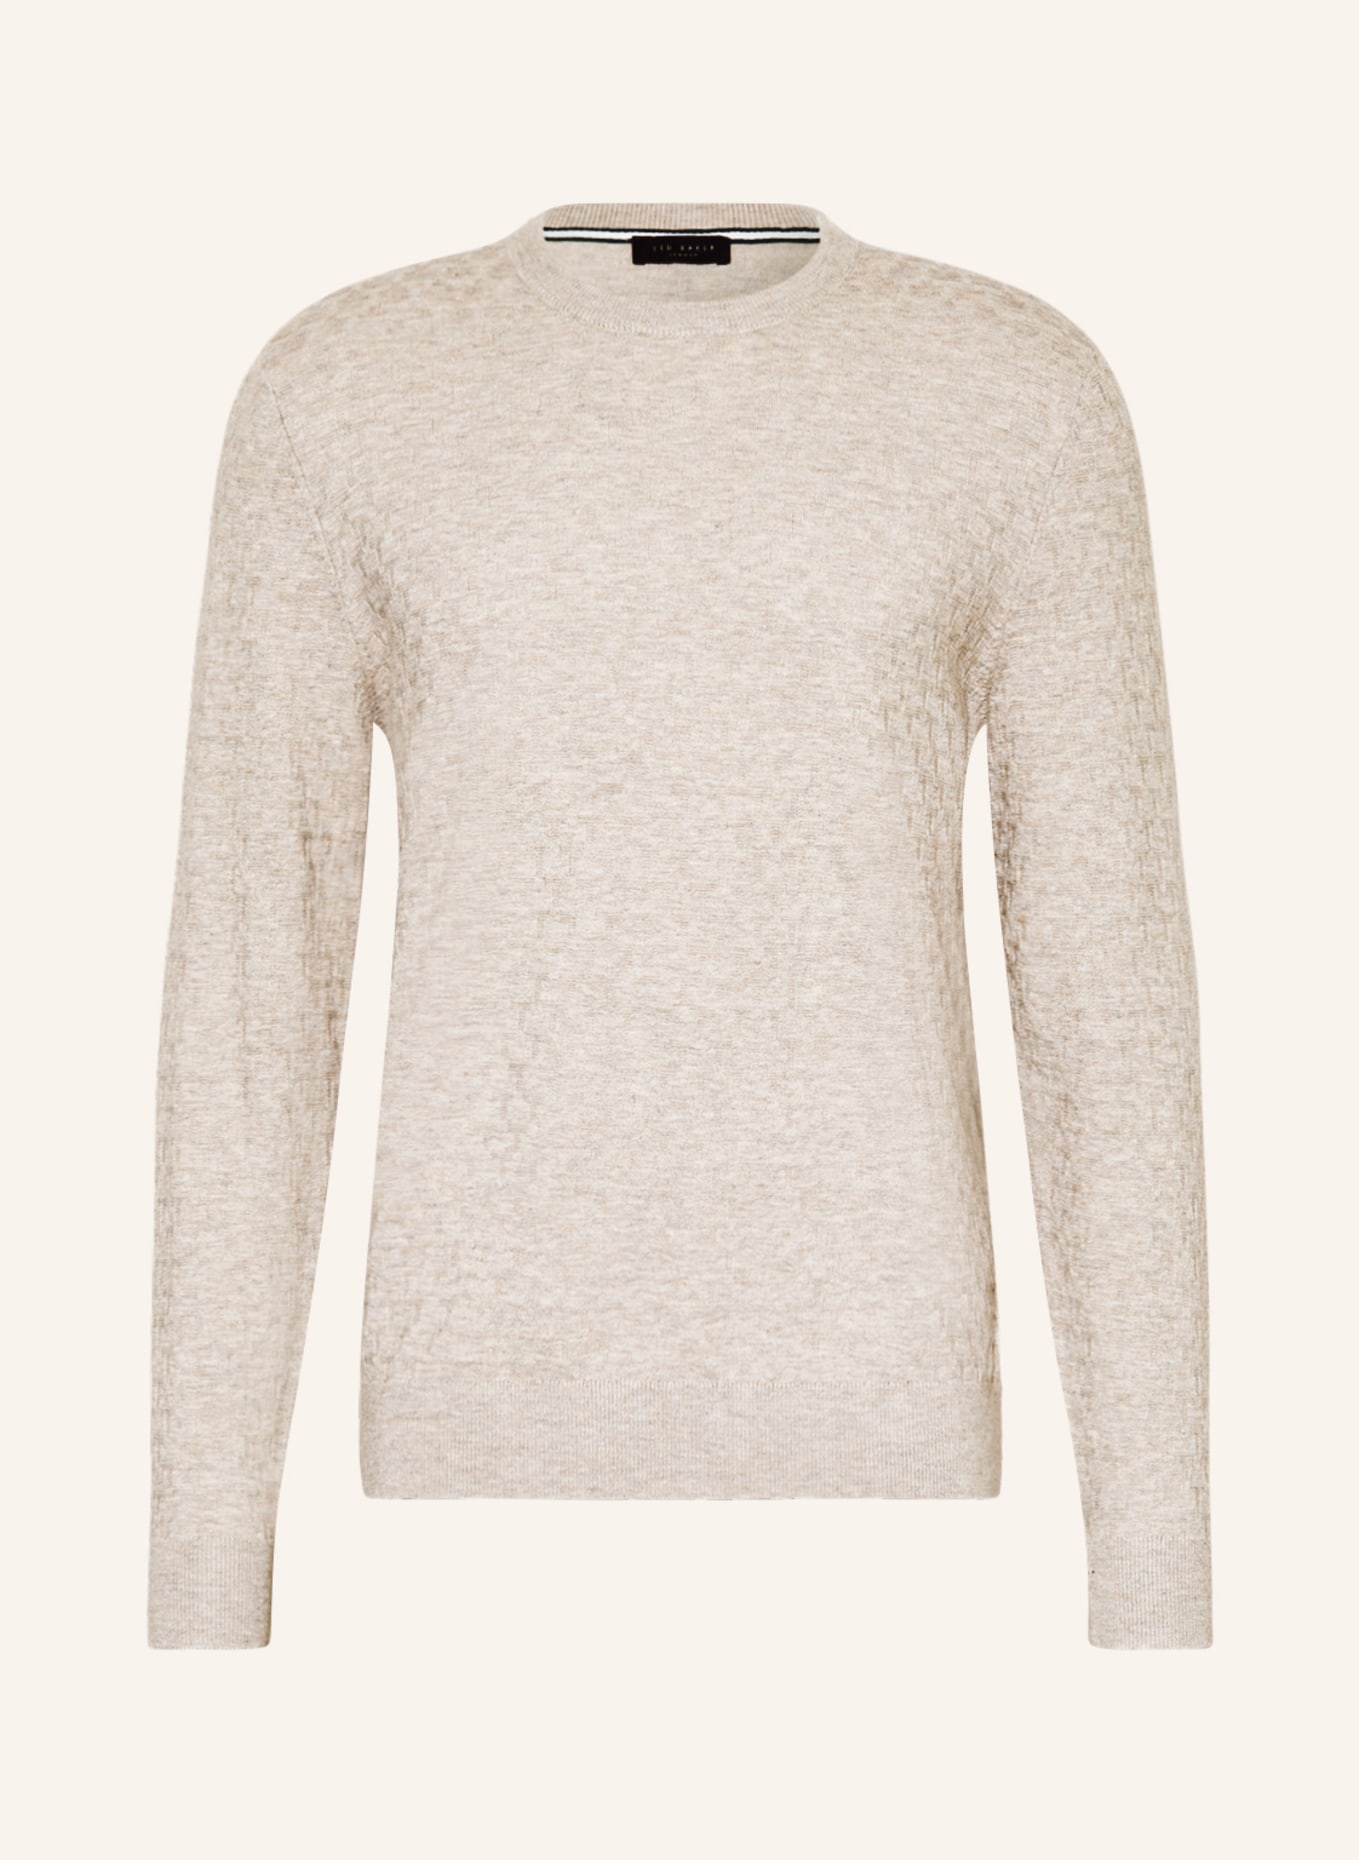 TED BAKER Pullover LOUNG, Farbe: BEIGE (Bild 1)